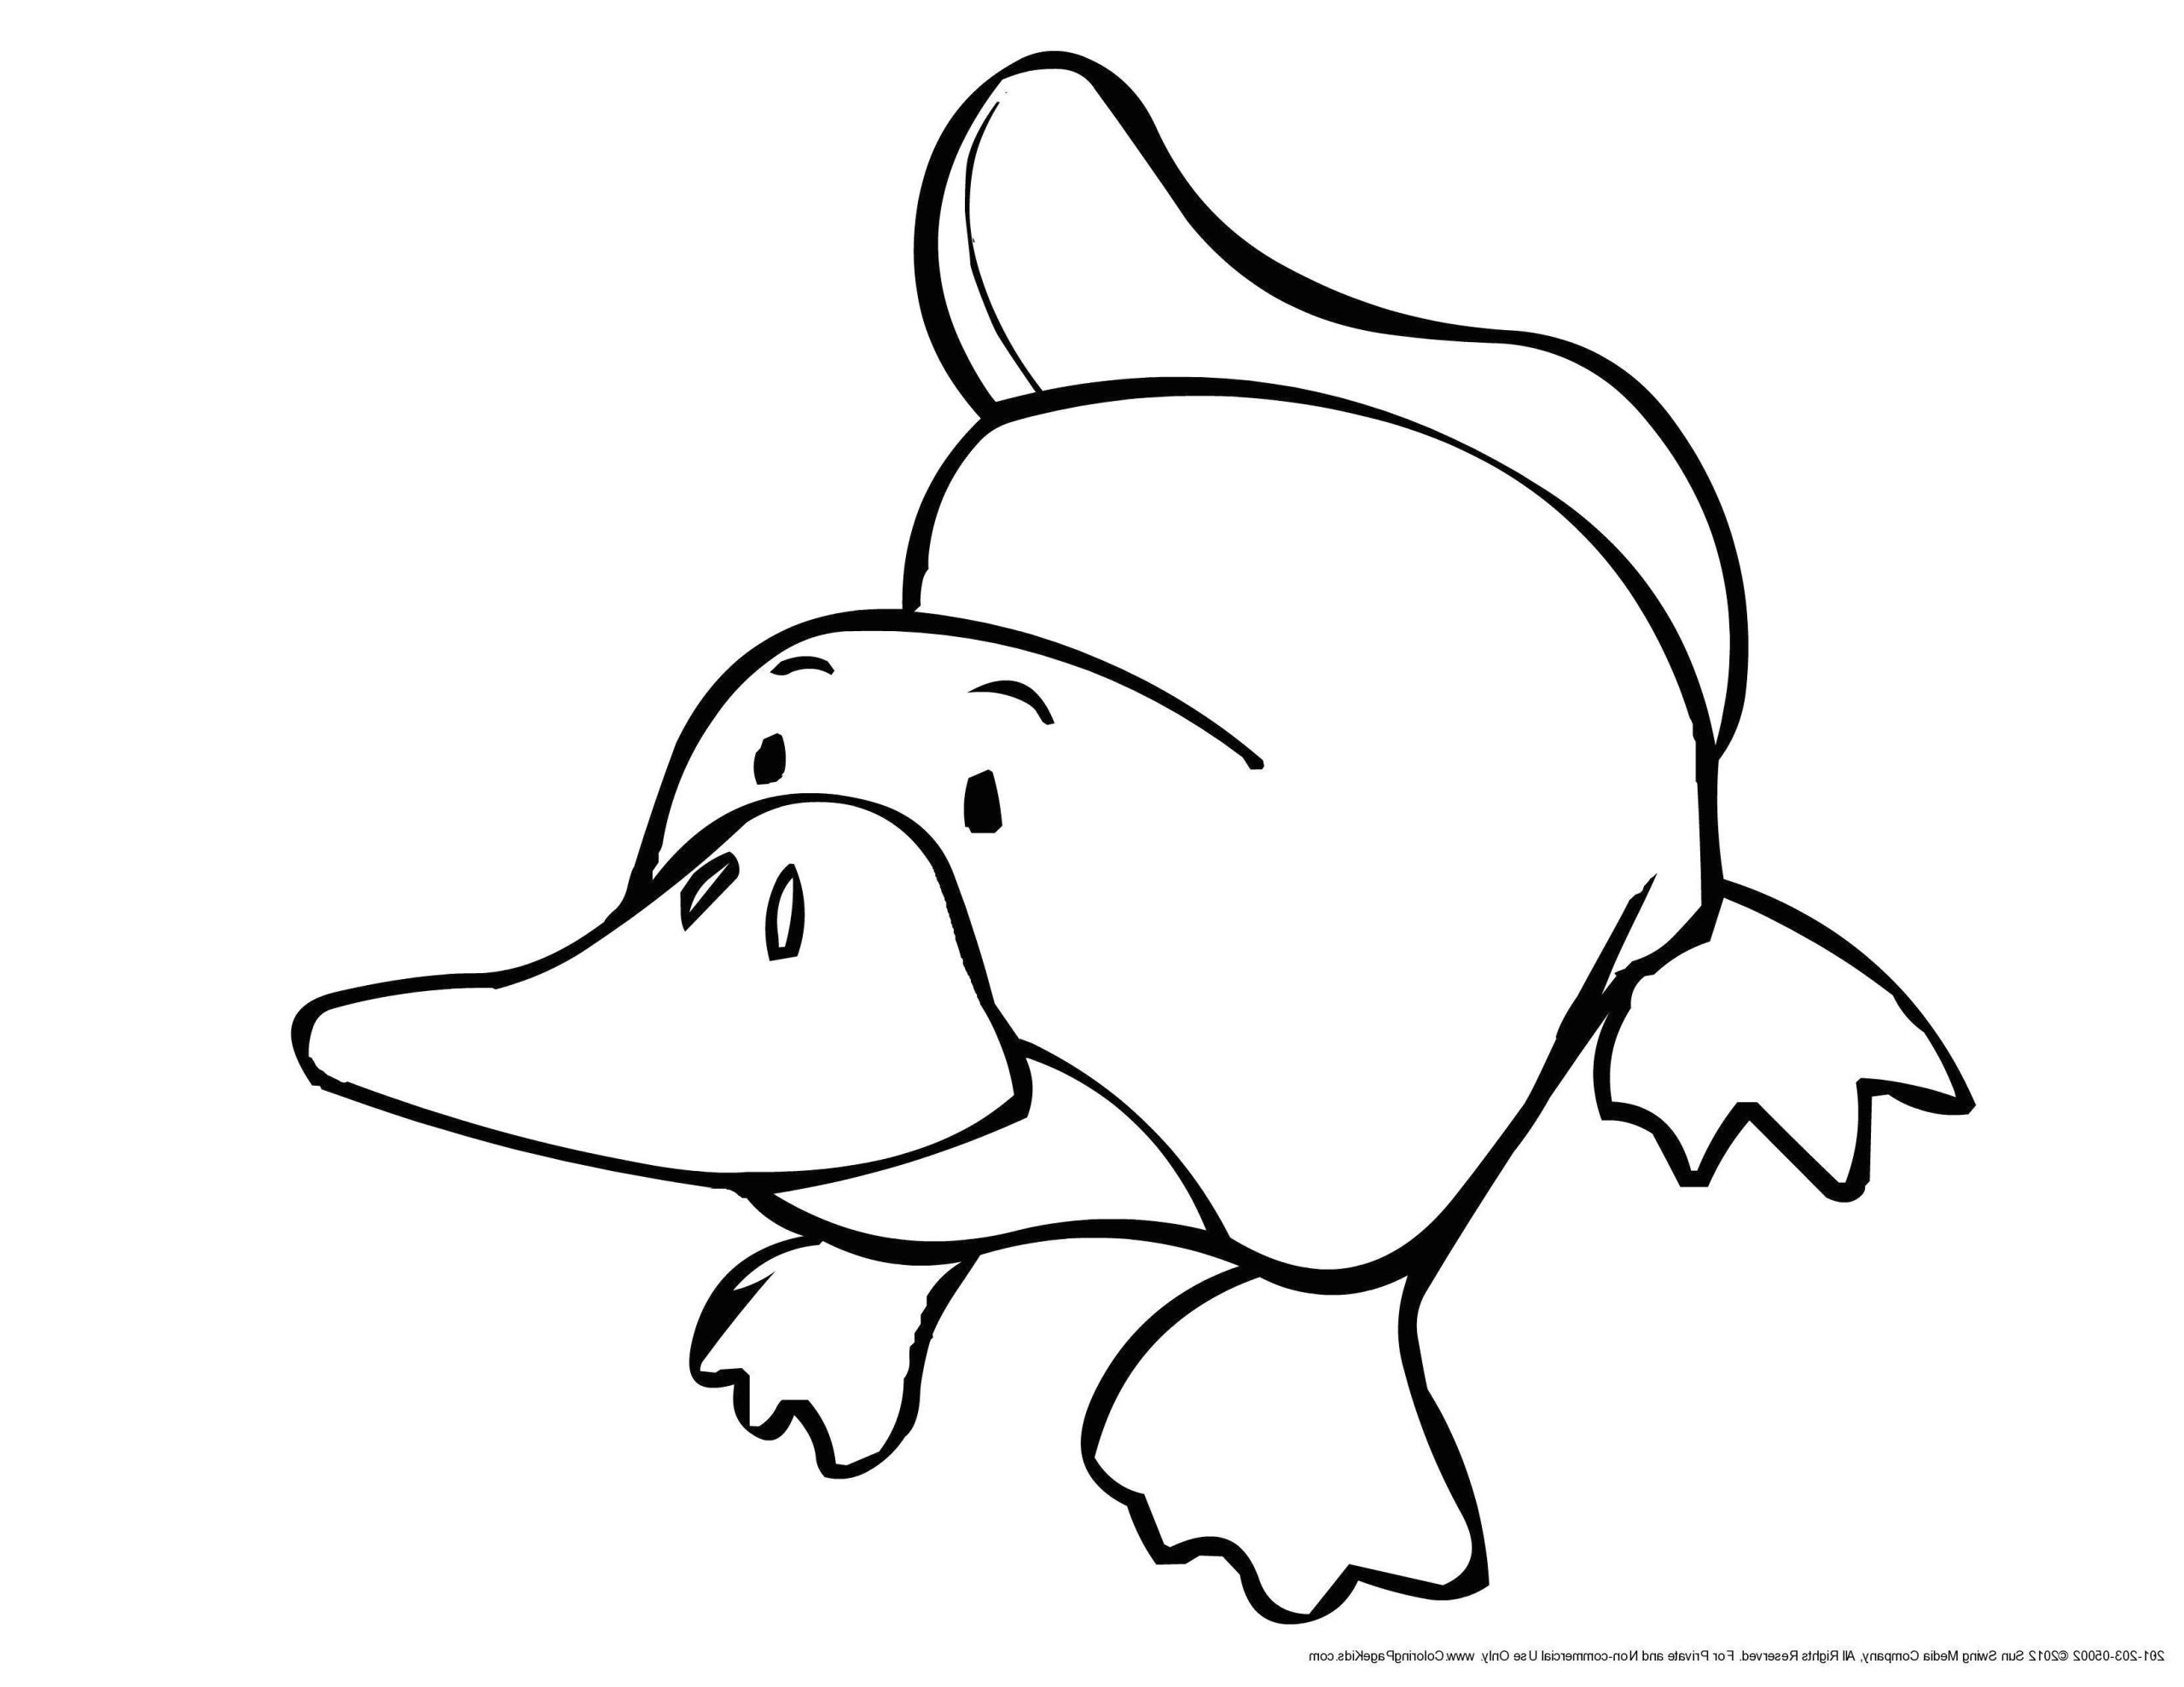 mega charizard ex coloring page best of image coloring pages page 198 jvzooreview of mega charizard ex coloring page jpg